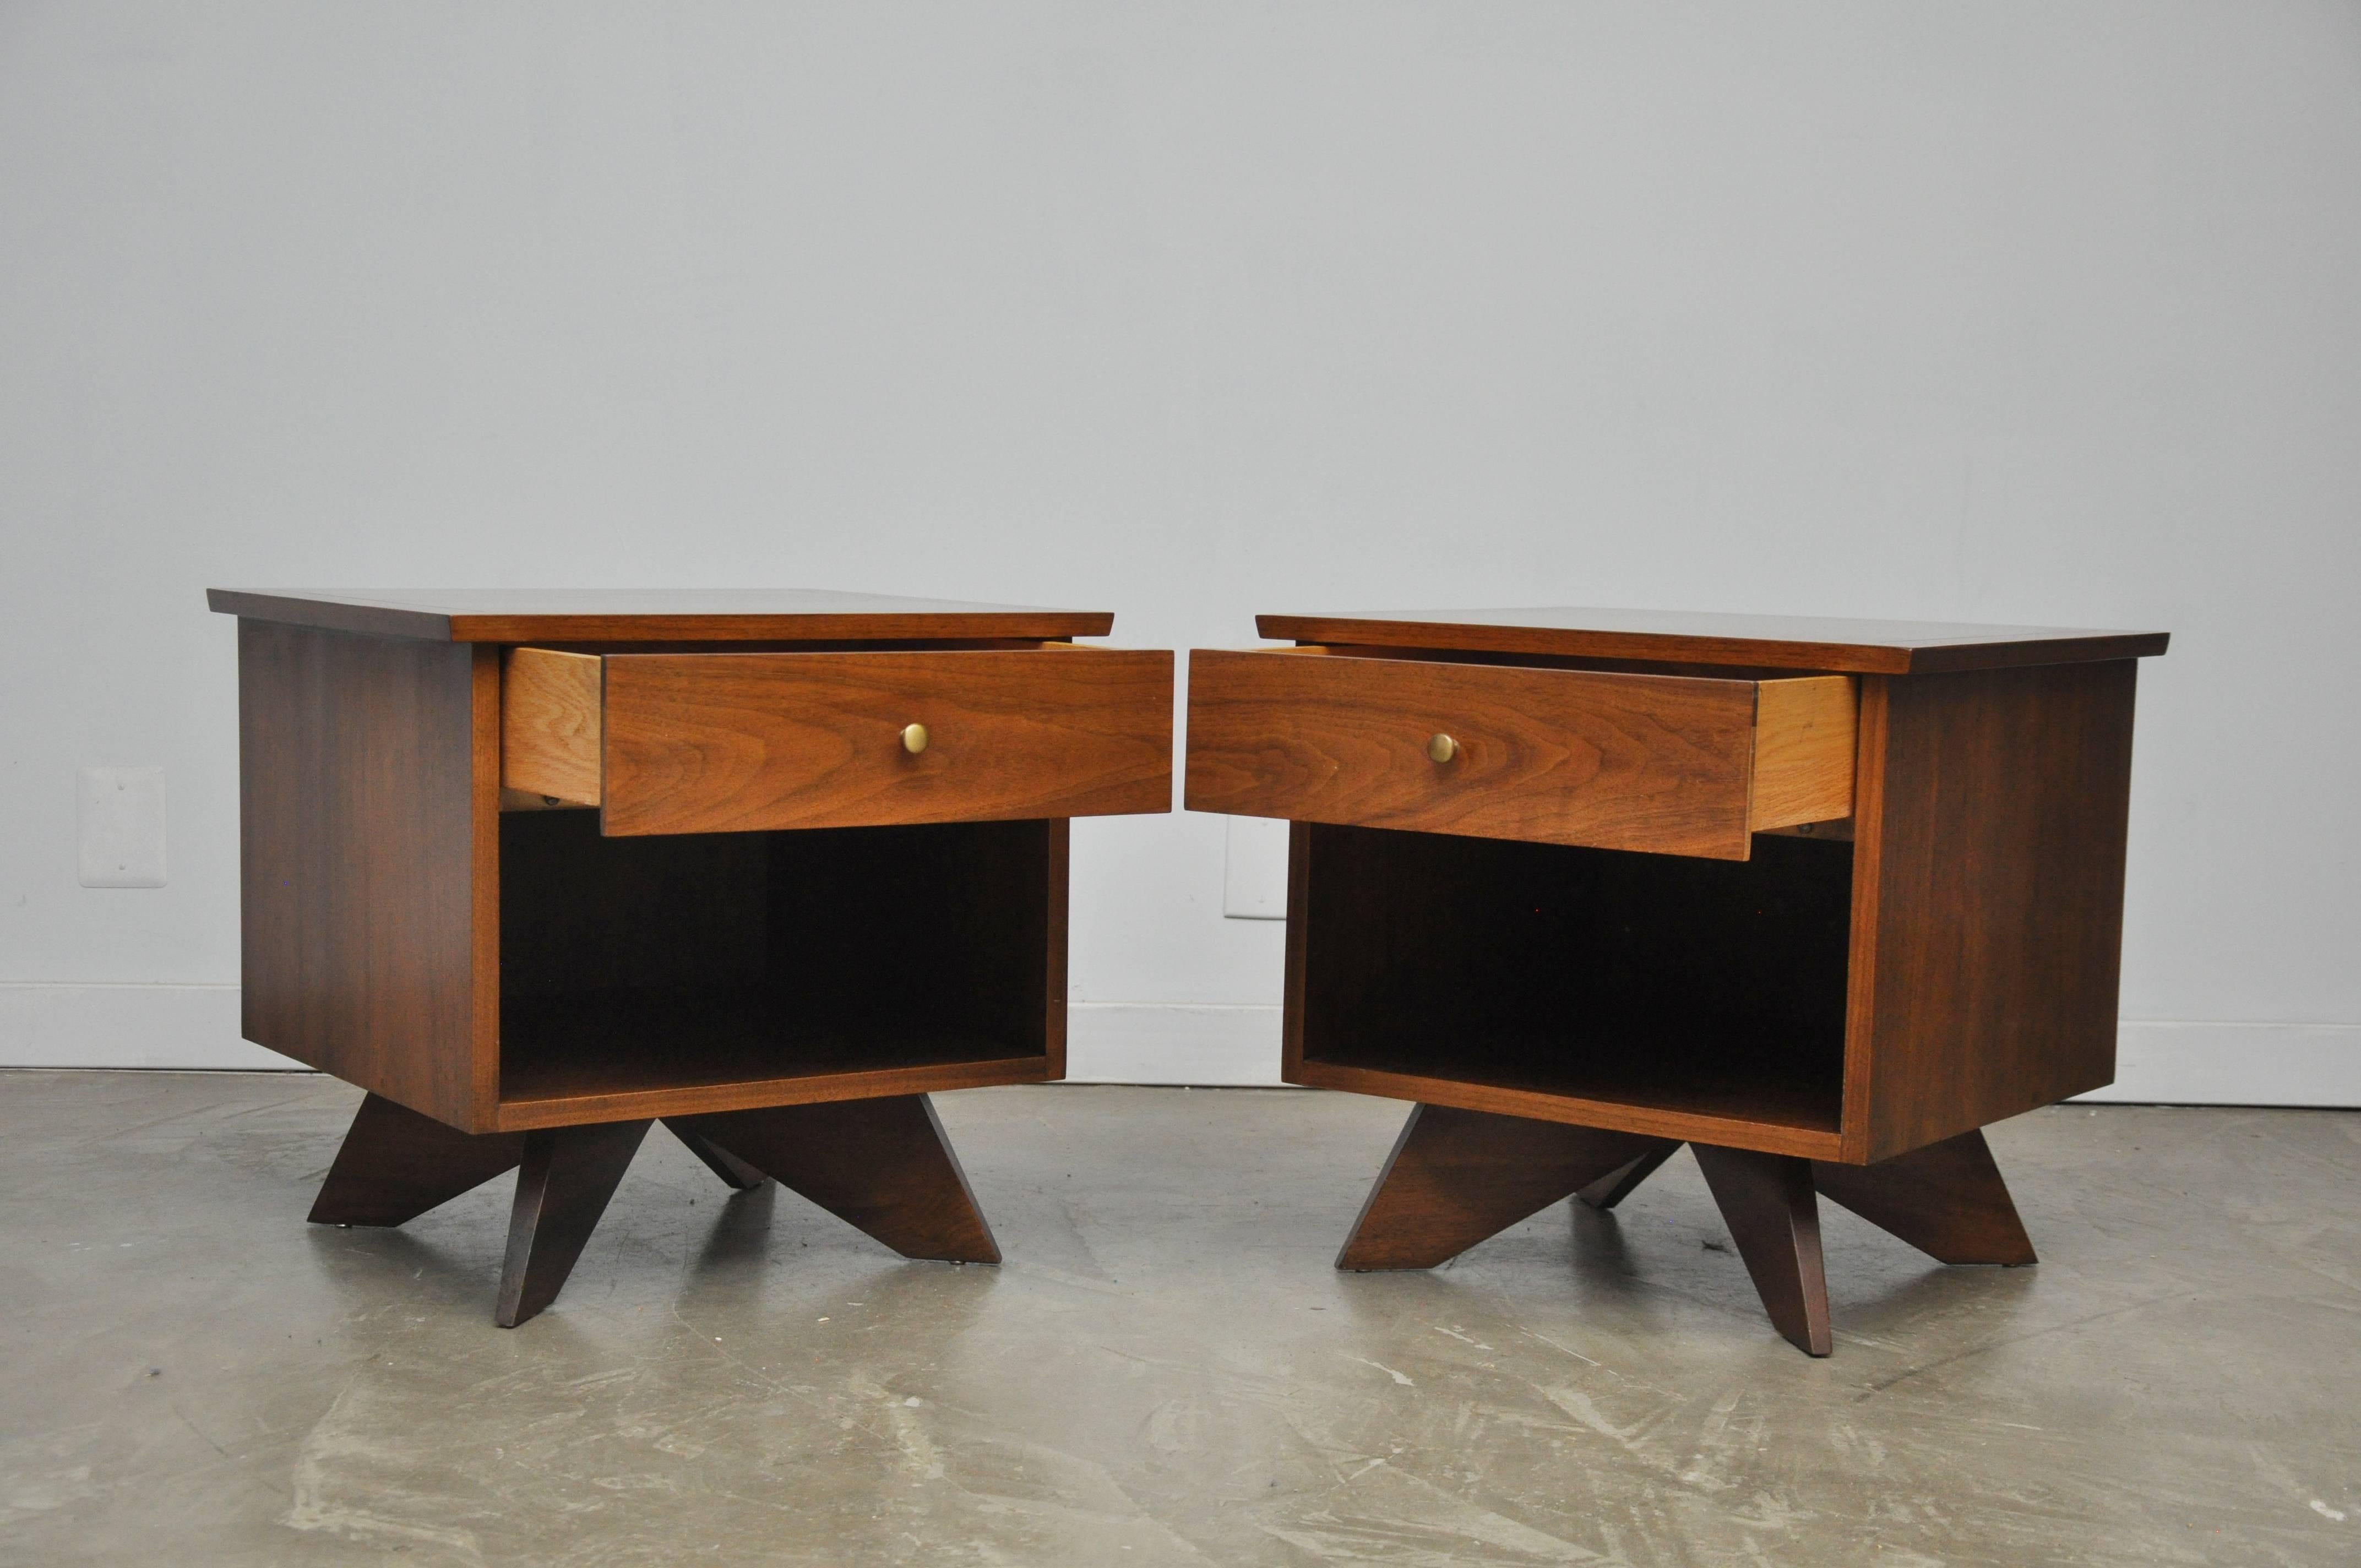 Pair of walnut nightstands or end tables by George Nakashima for Widdicomb, from his Sundra series. Tops have been refinished, all else is in perfect original condition.